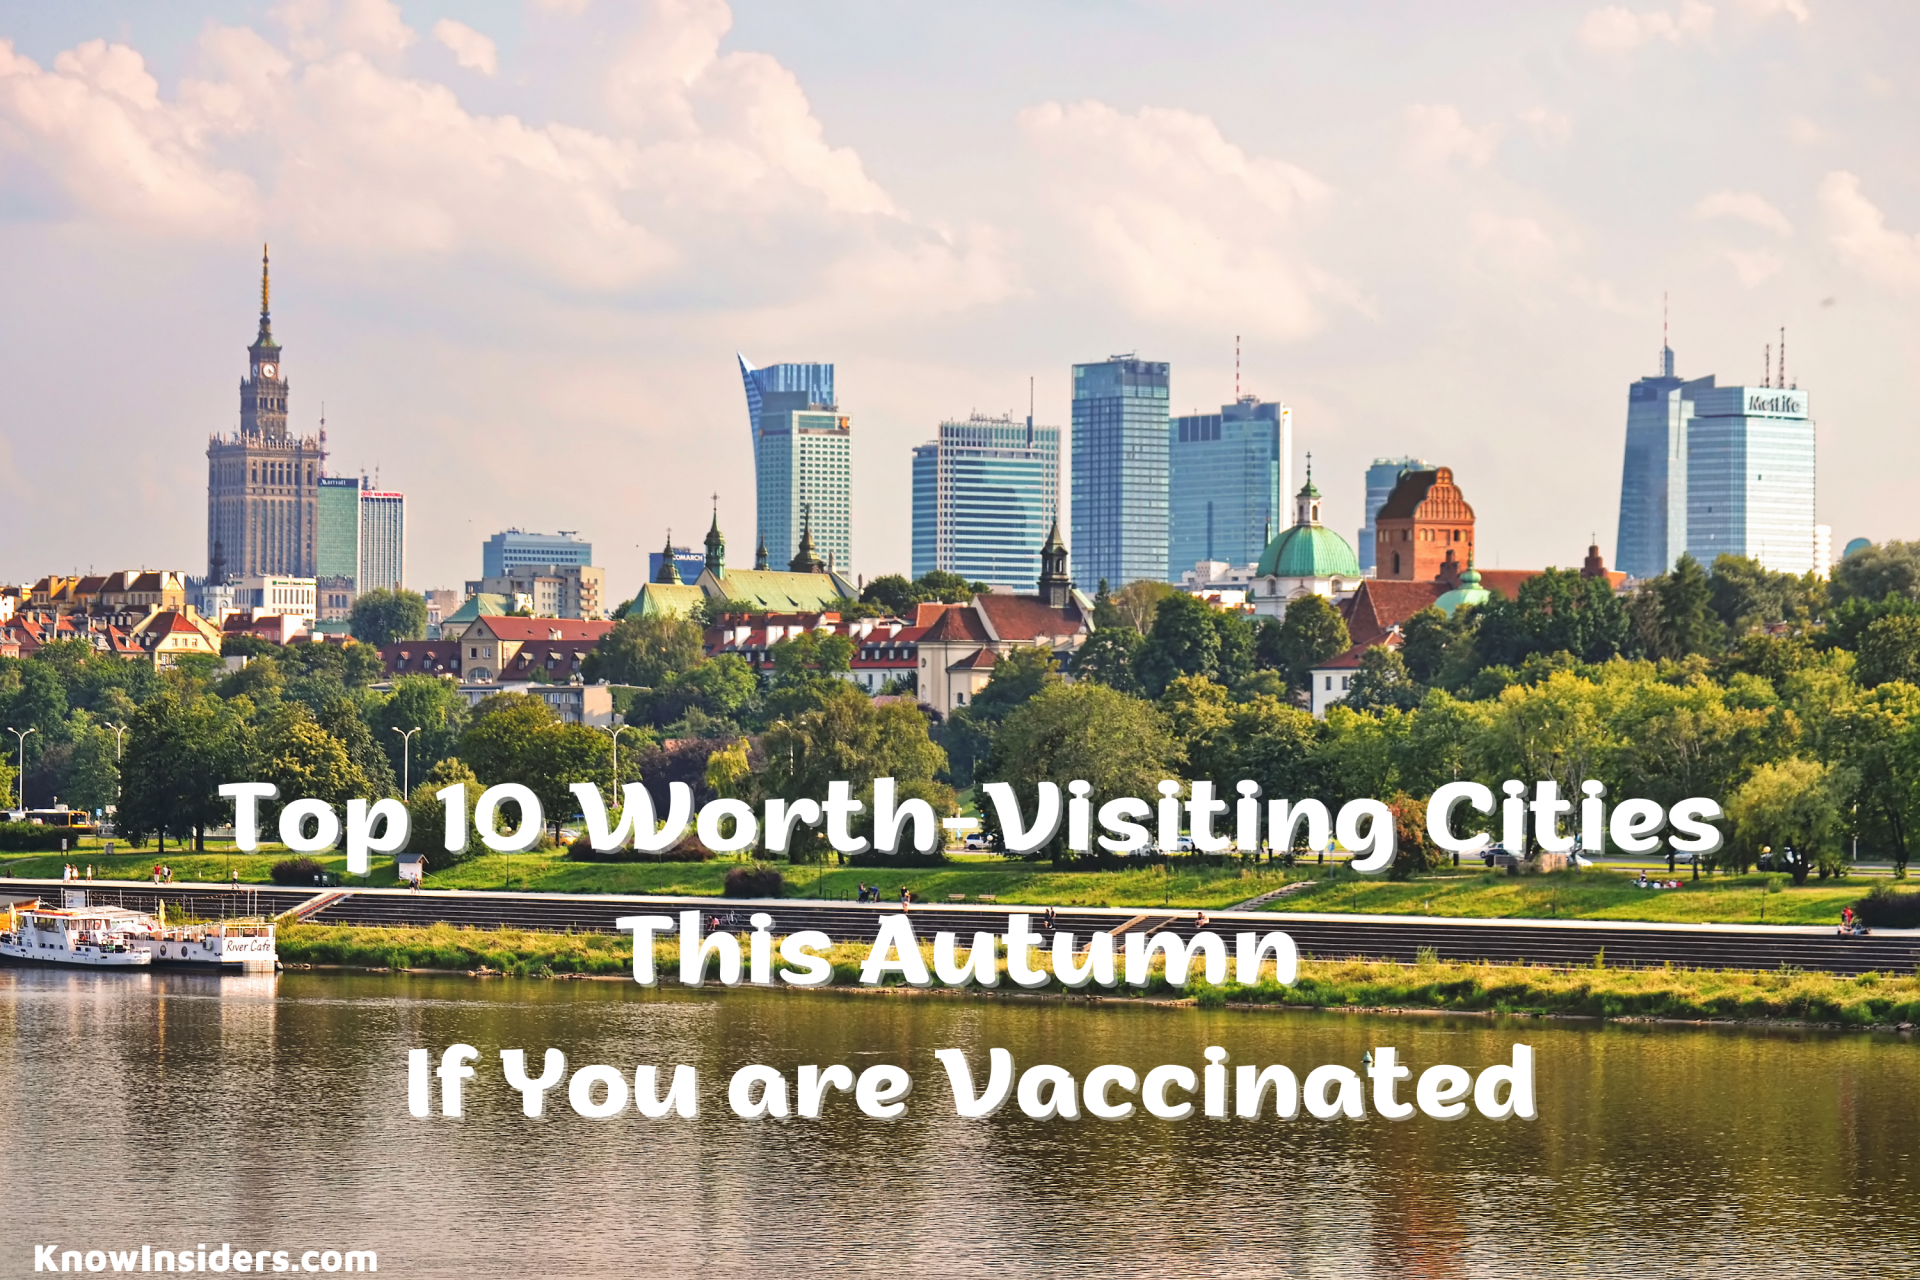 Top 10 Worth-Visiting Cities This Autumn If You are Vaccinated